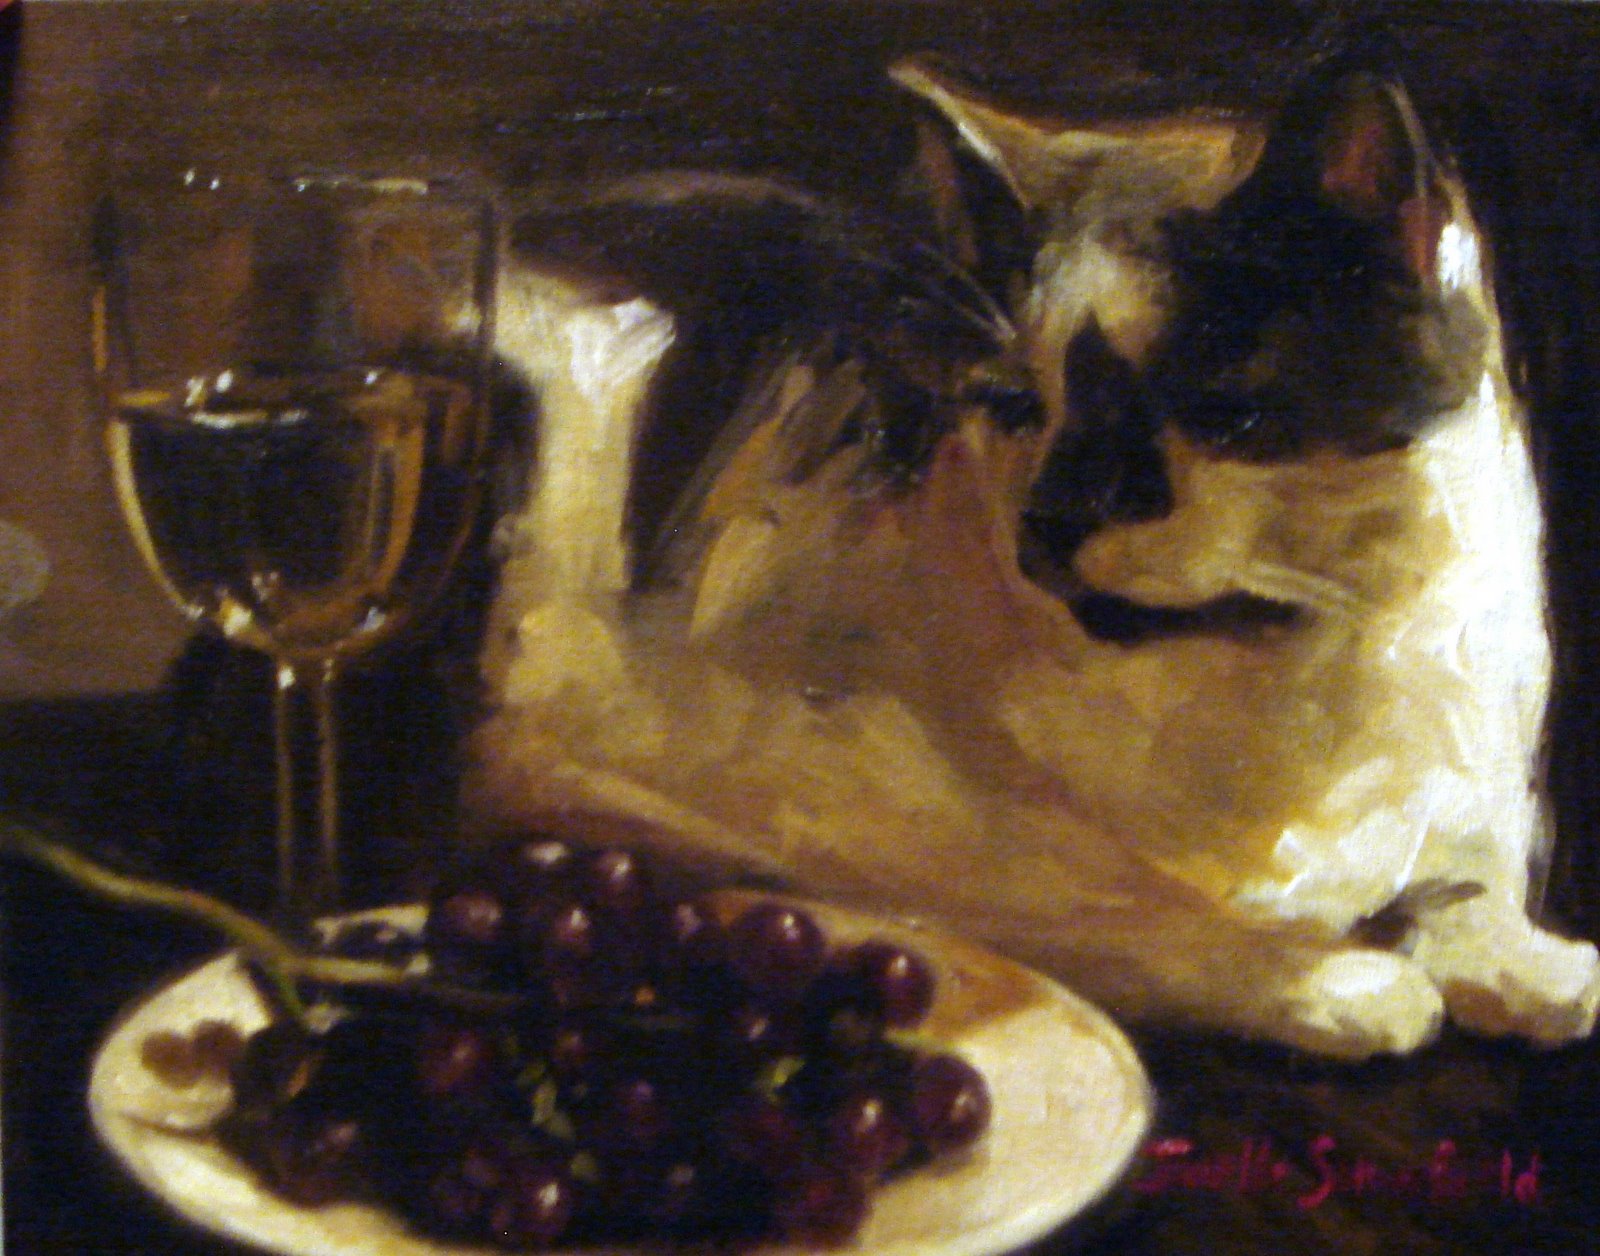 [OLIVER+WITH+WINE+AND+GRAPES.jpg]